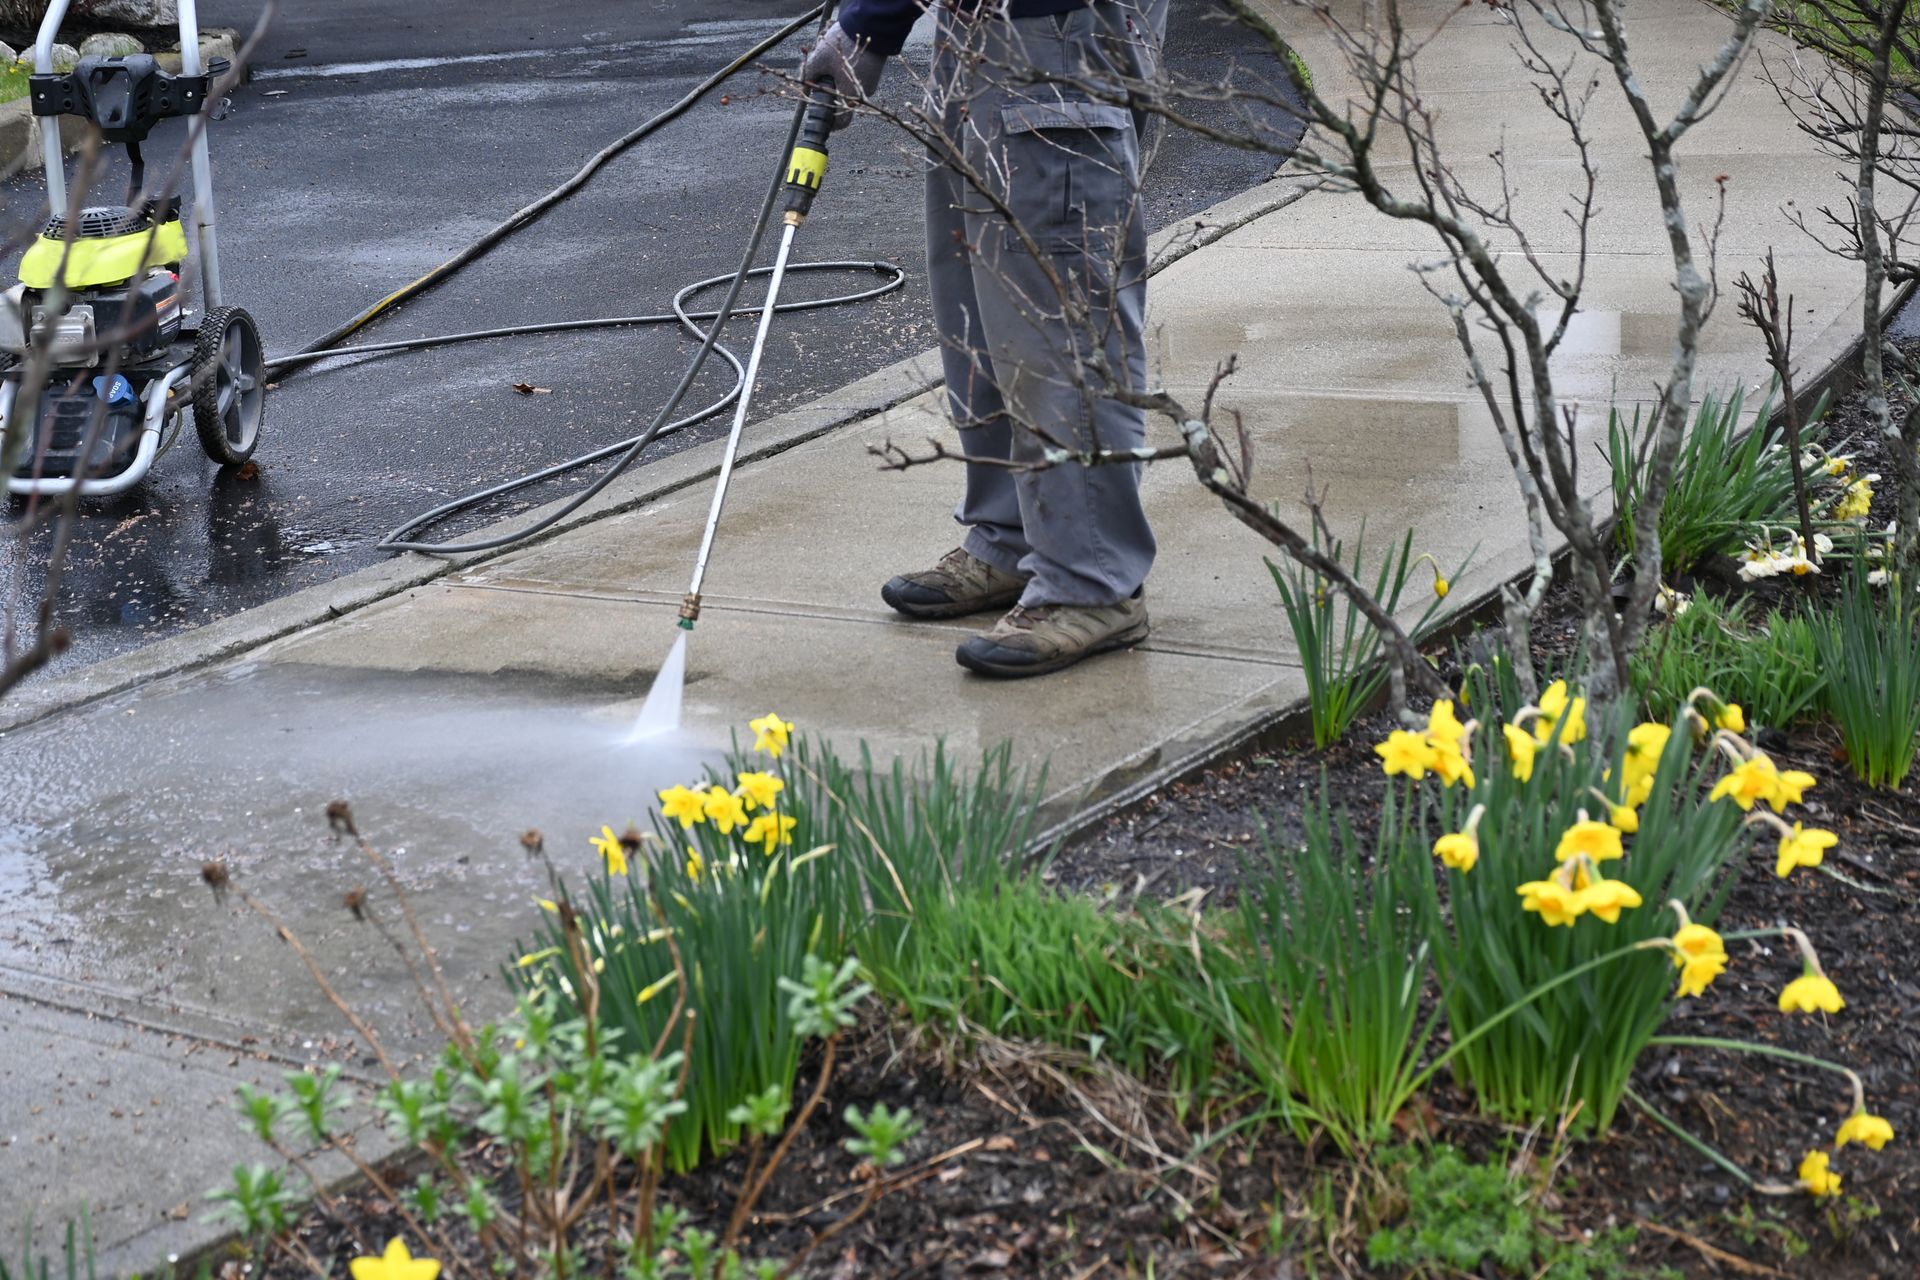 a person is using a high pressure washer to clean a sidewalk